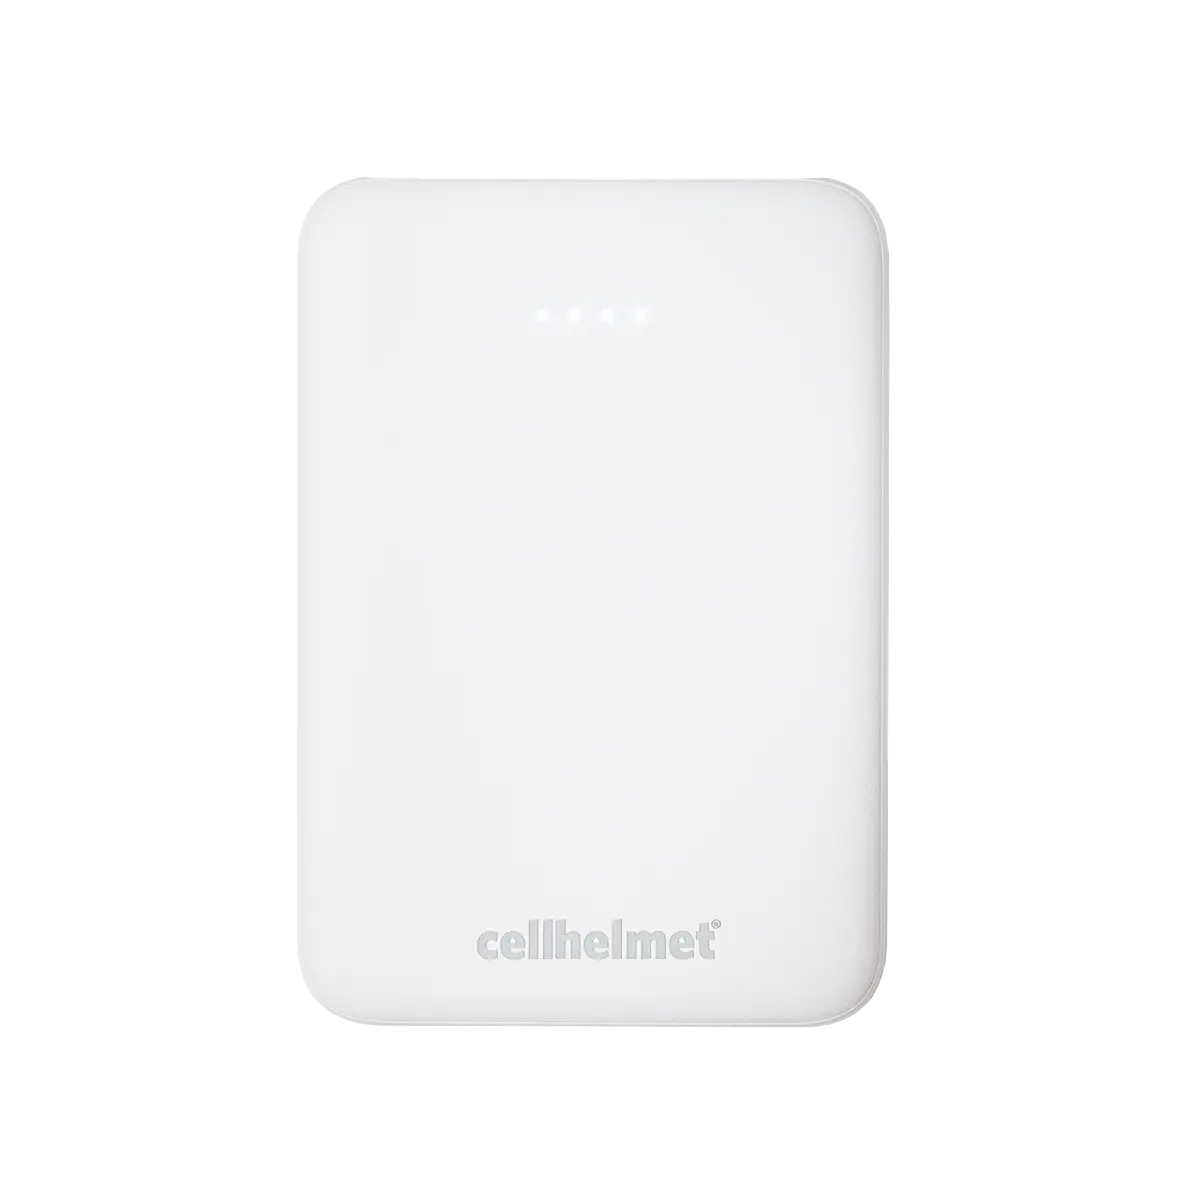 Big Power Bank for On The Go Charging by cellhelmet